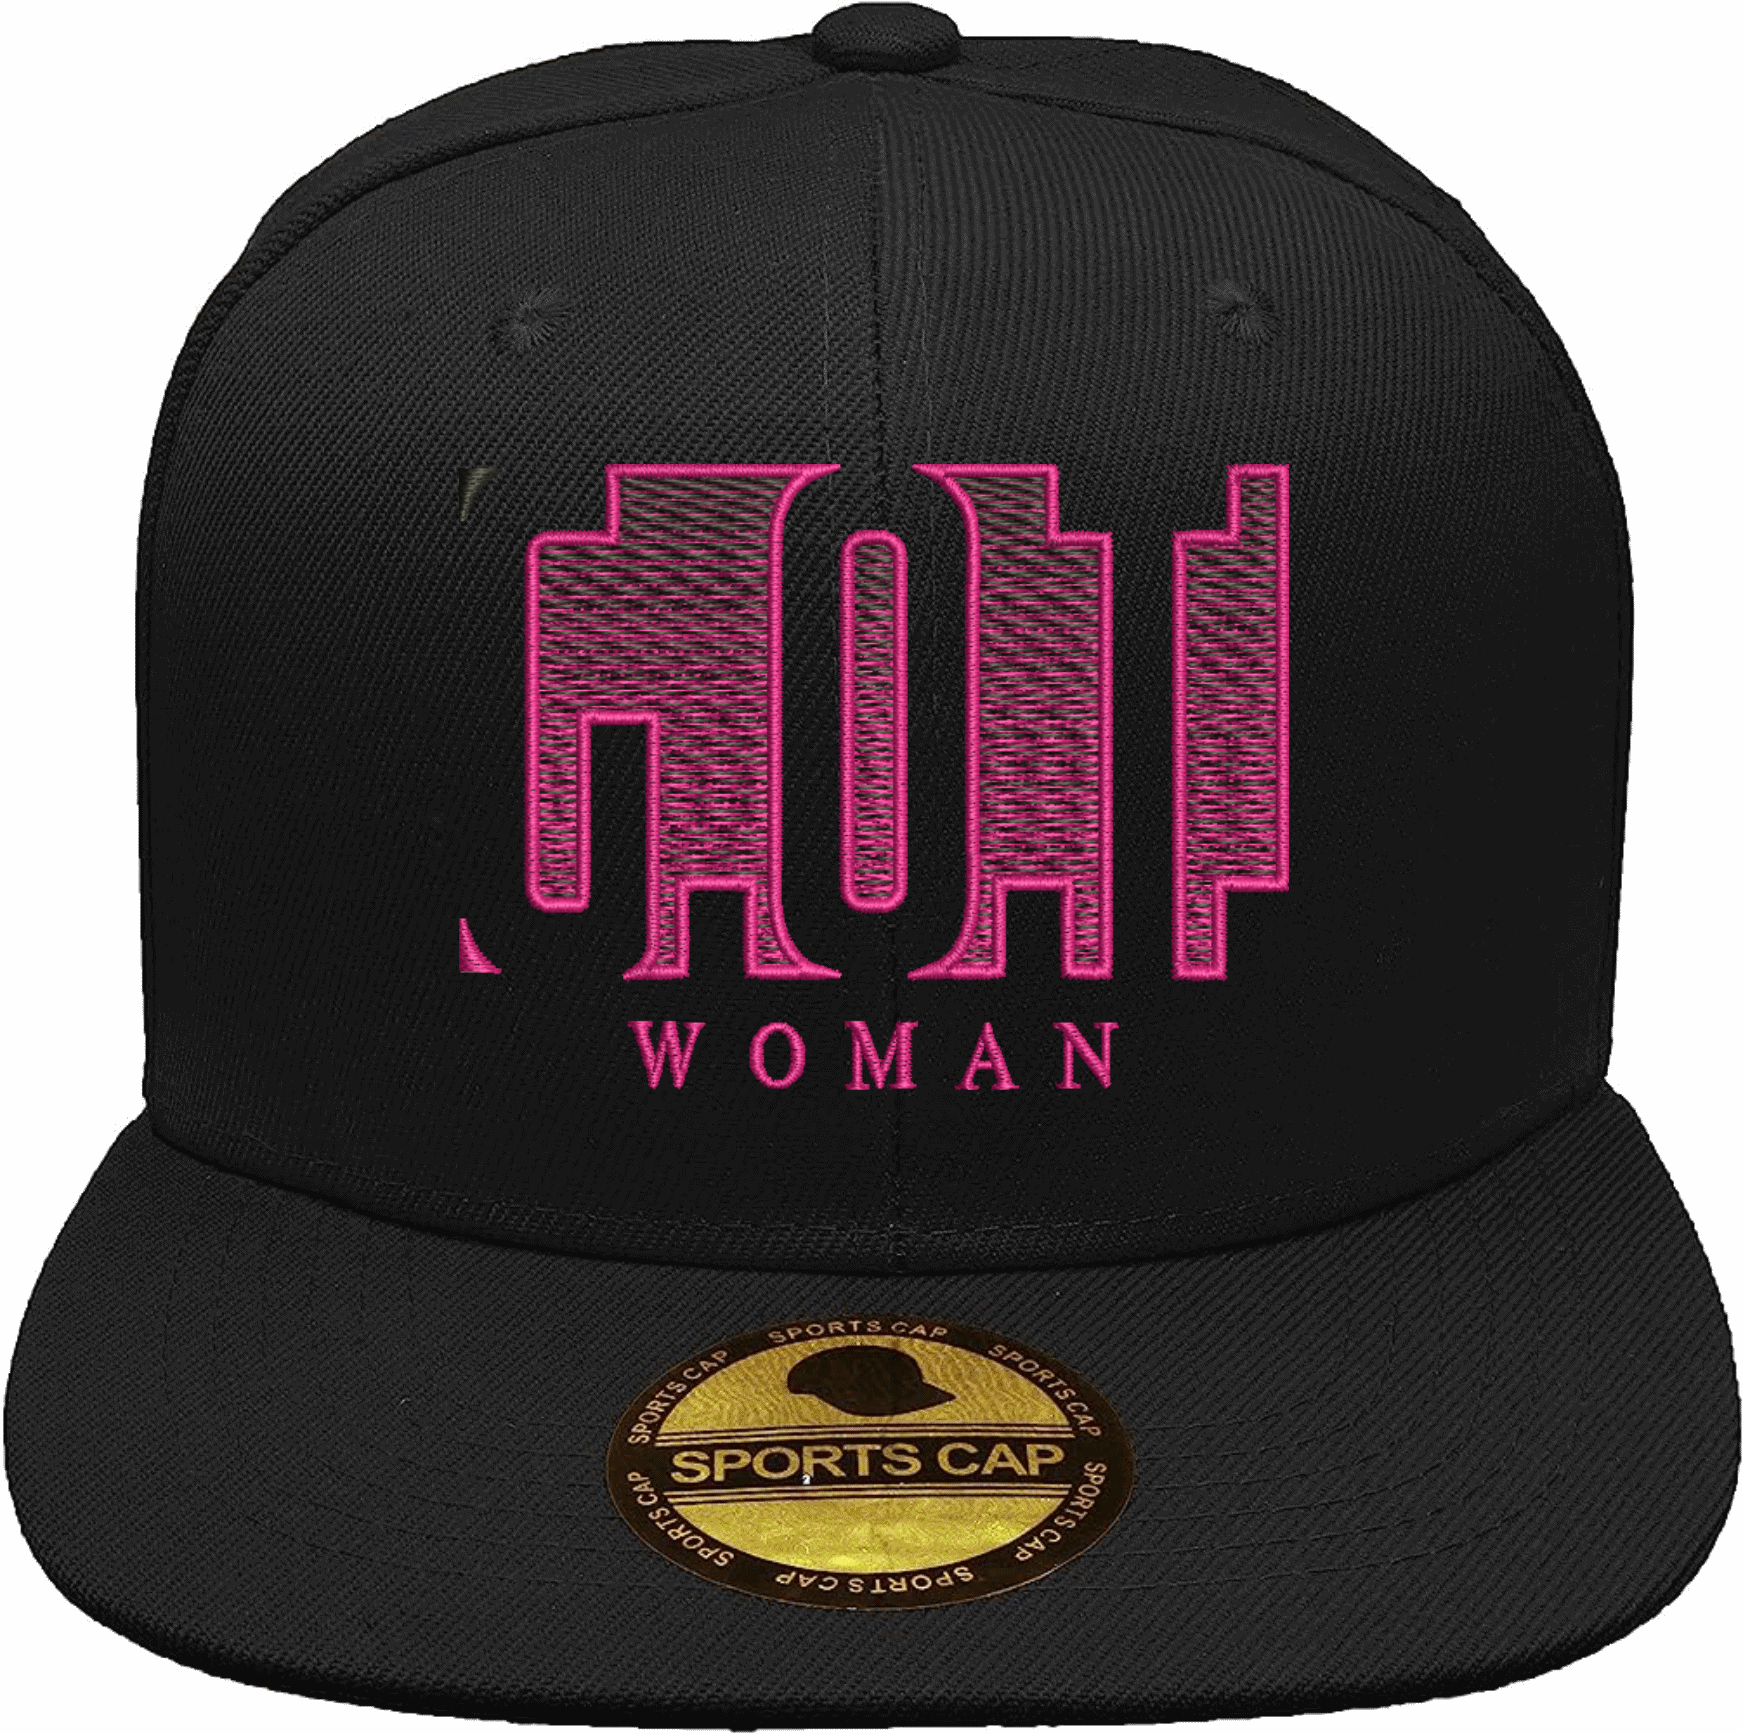 G.O.T WOMAN—God's Over This Woman City Lights Cap